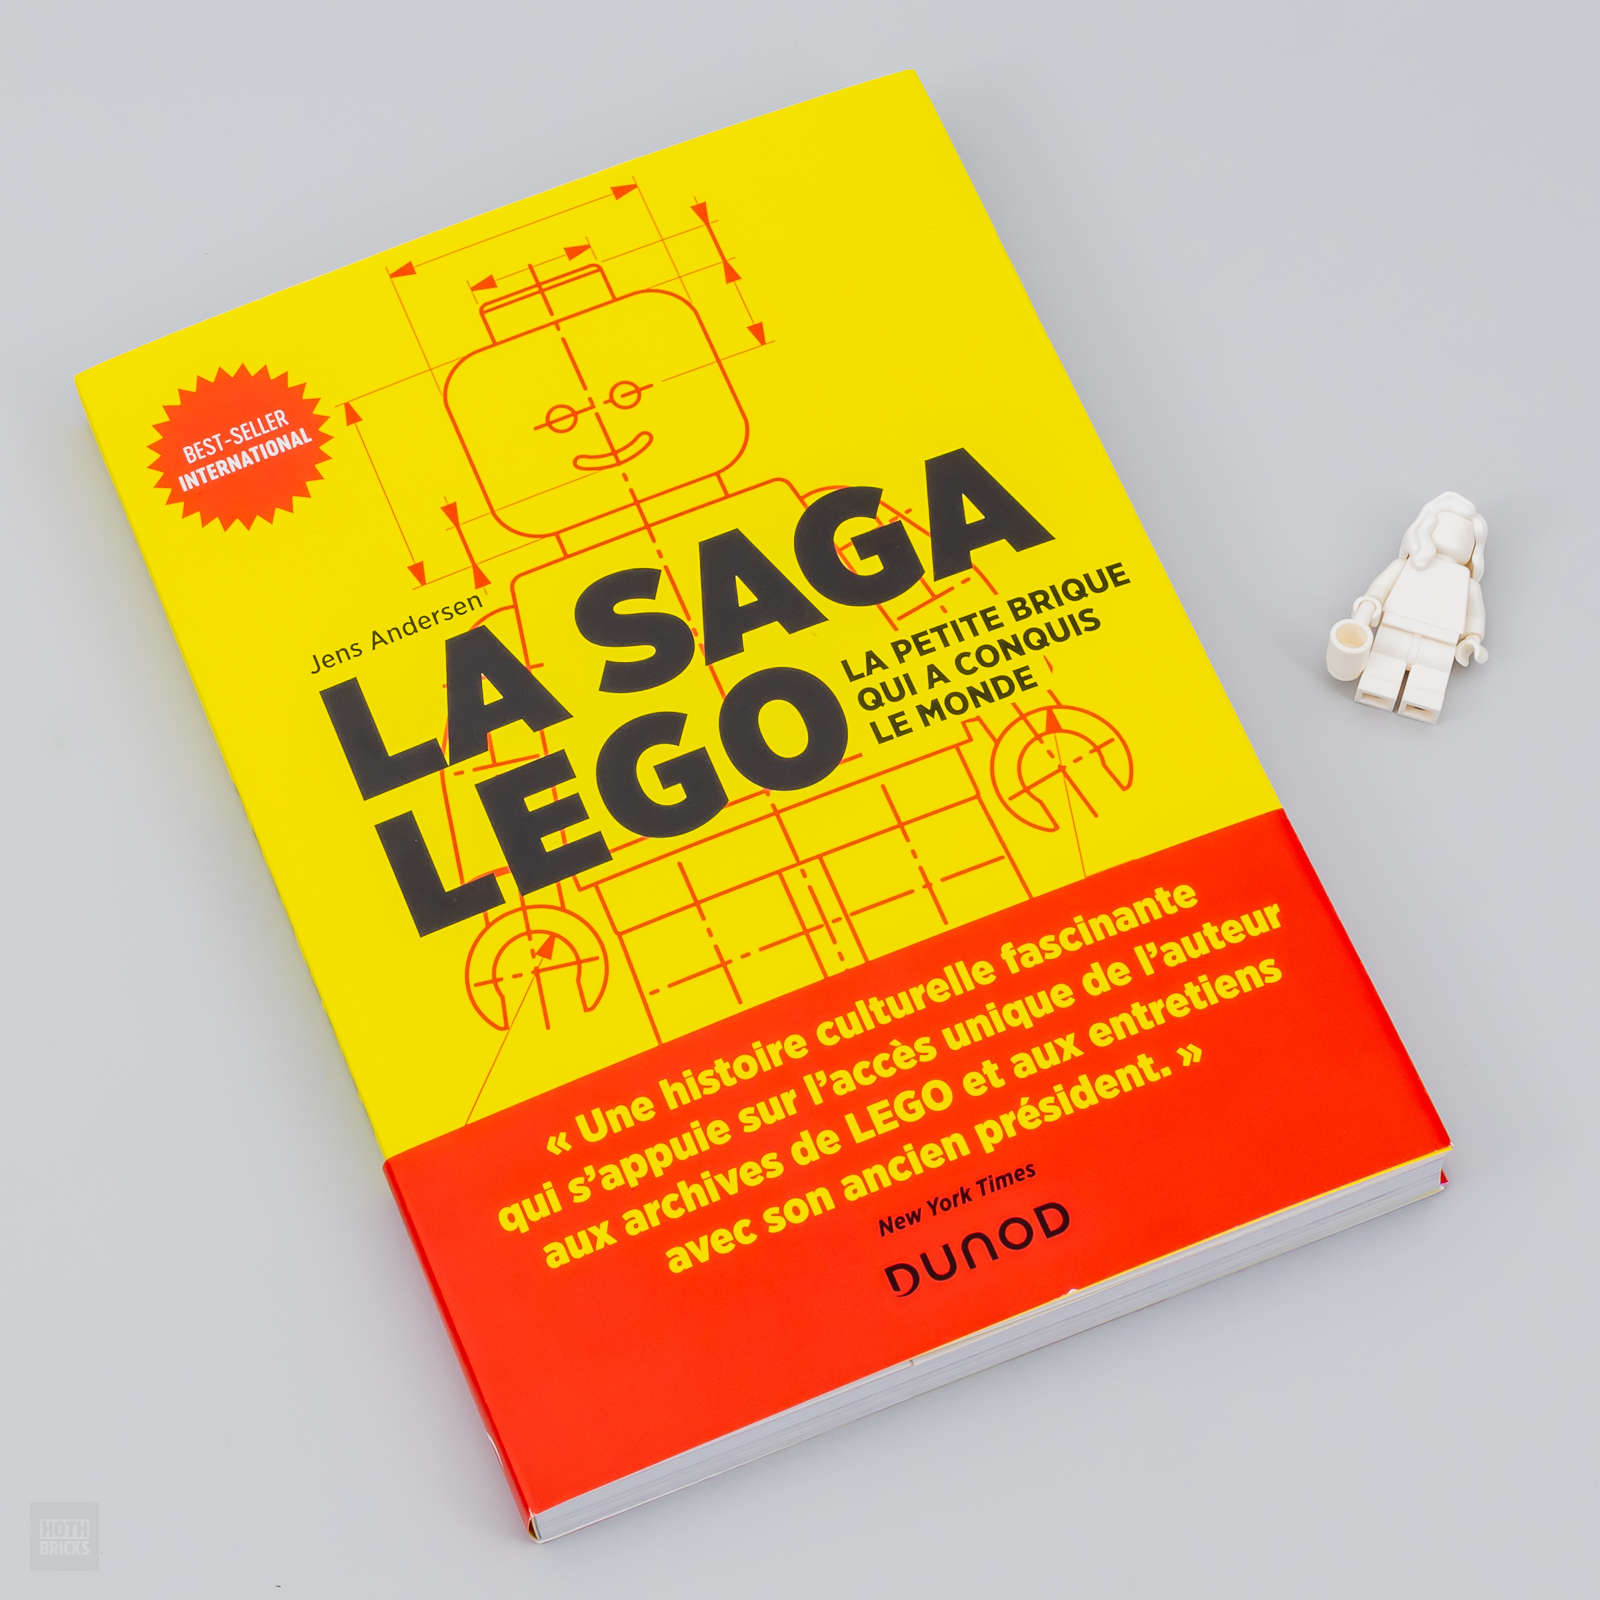 ▻ Must read: The LEGO saga - The little brick that conquered the world -  HOTH BRICKS